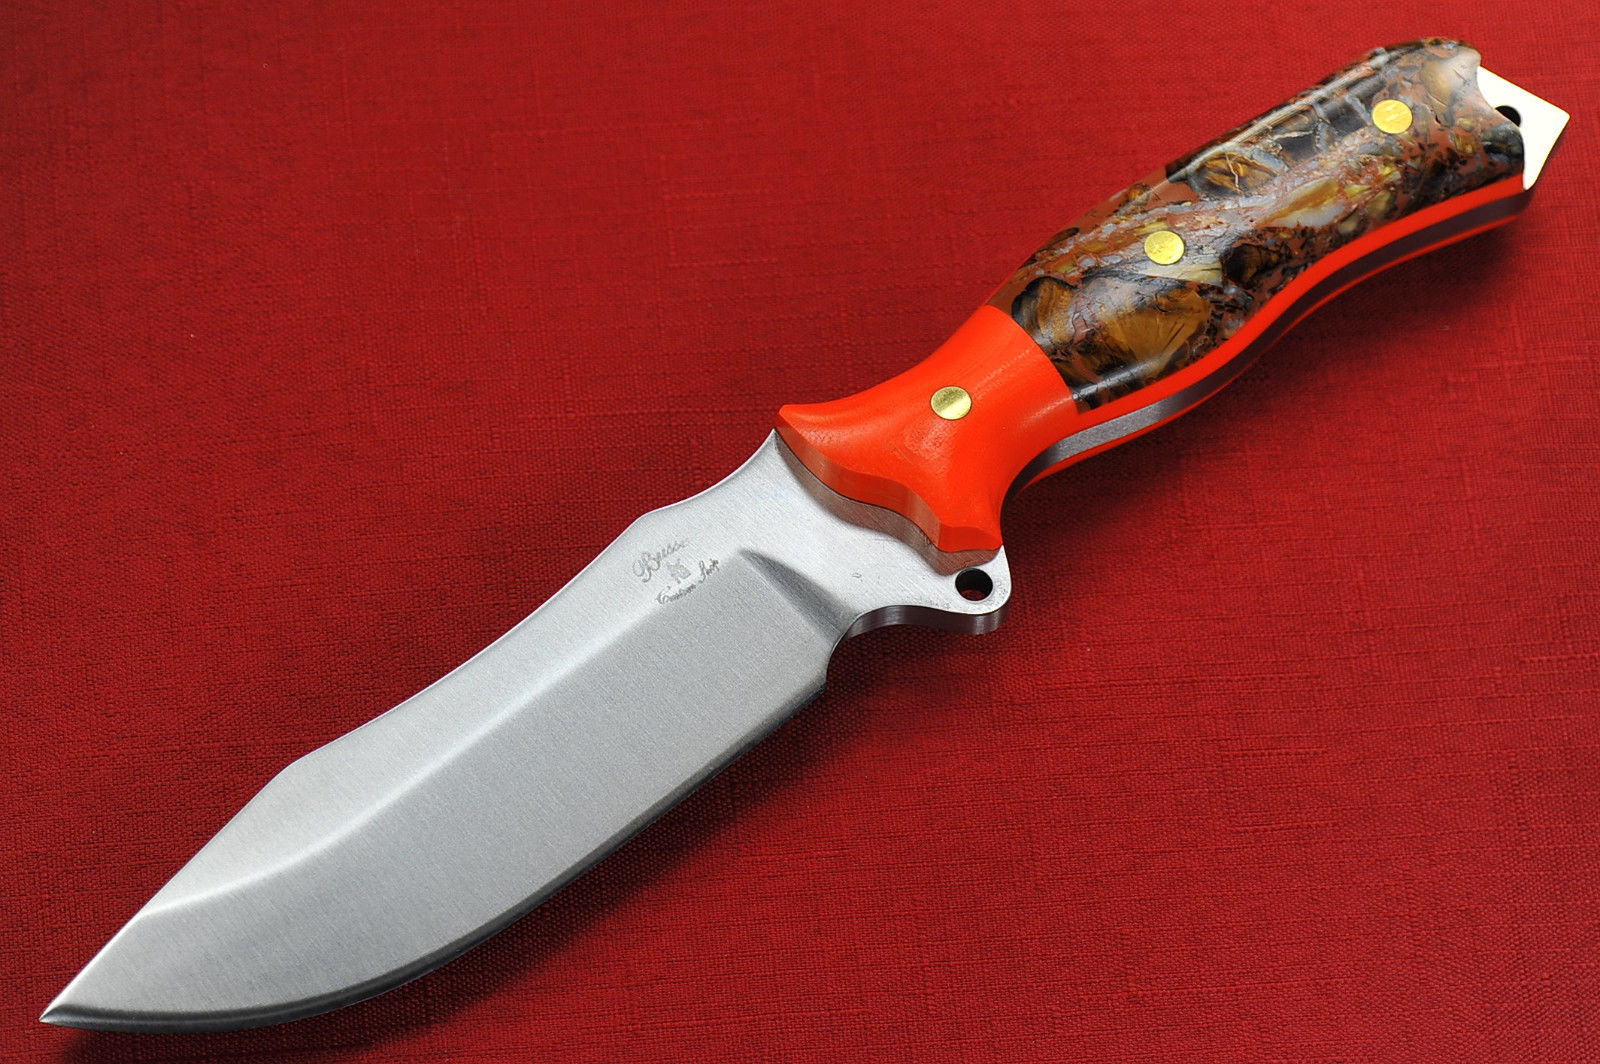 a knife on a red surface and a red background